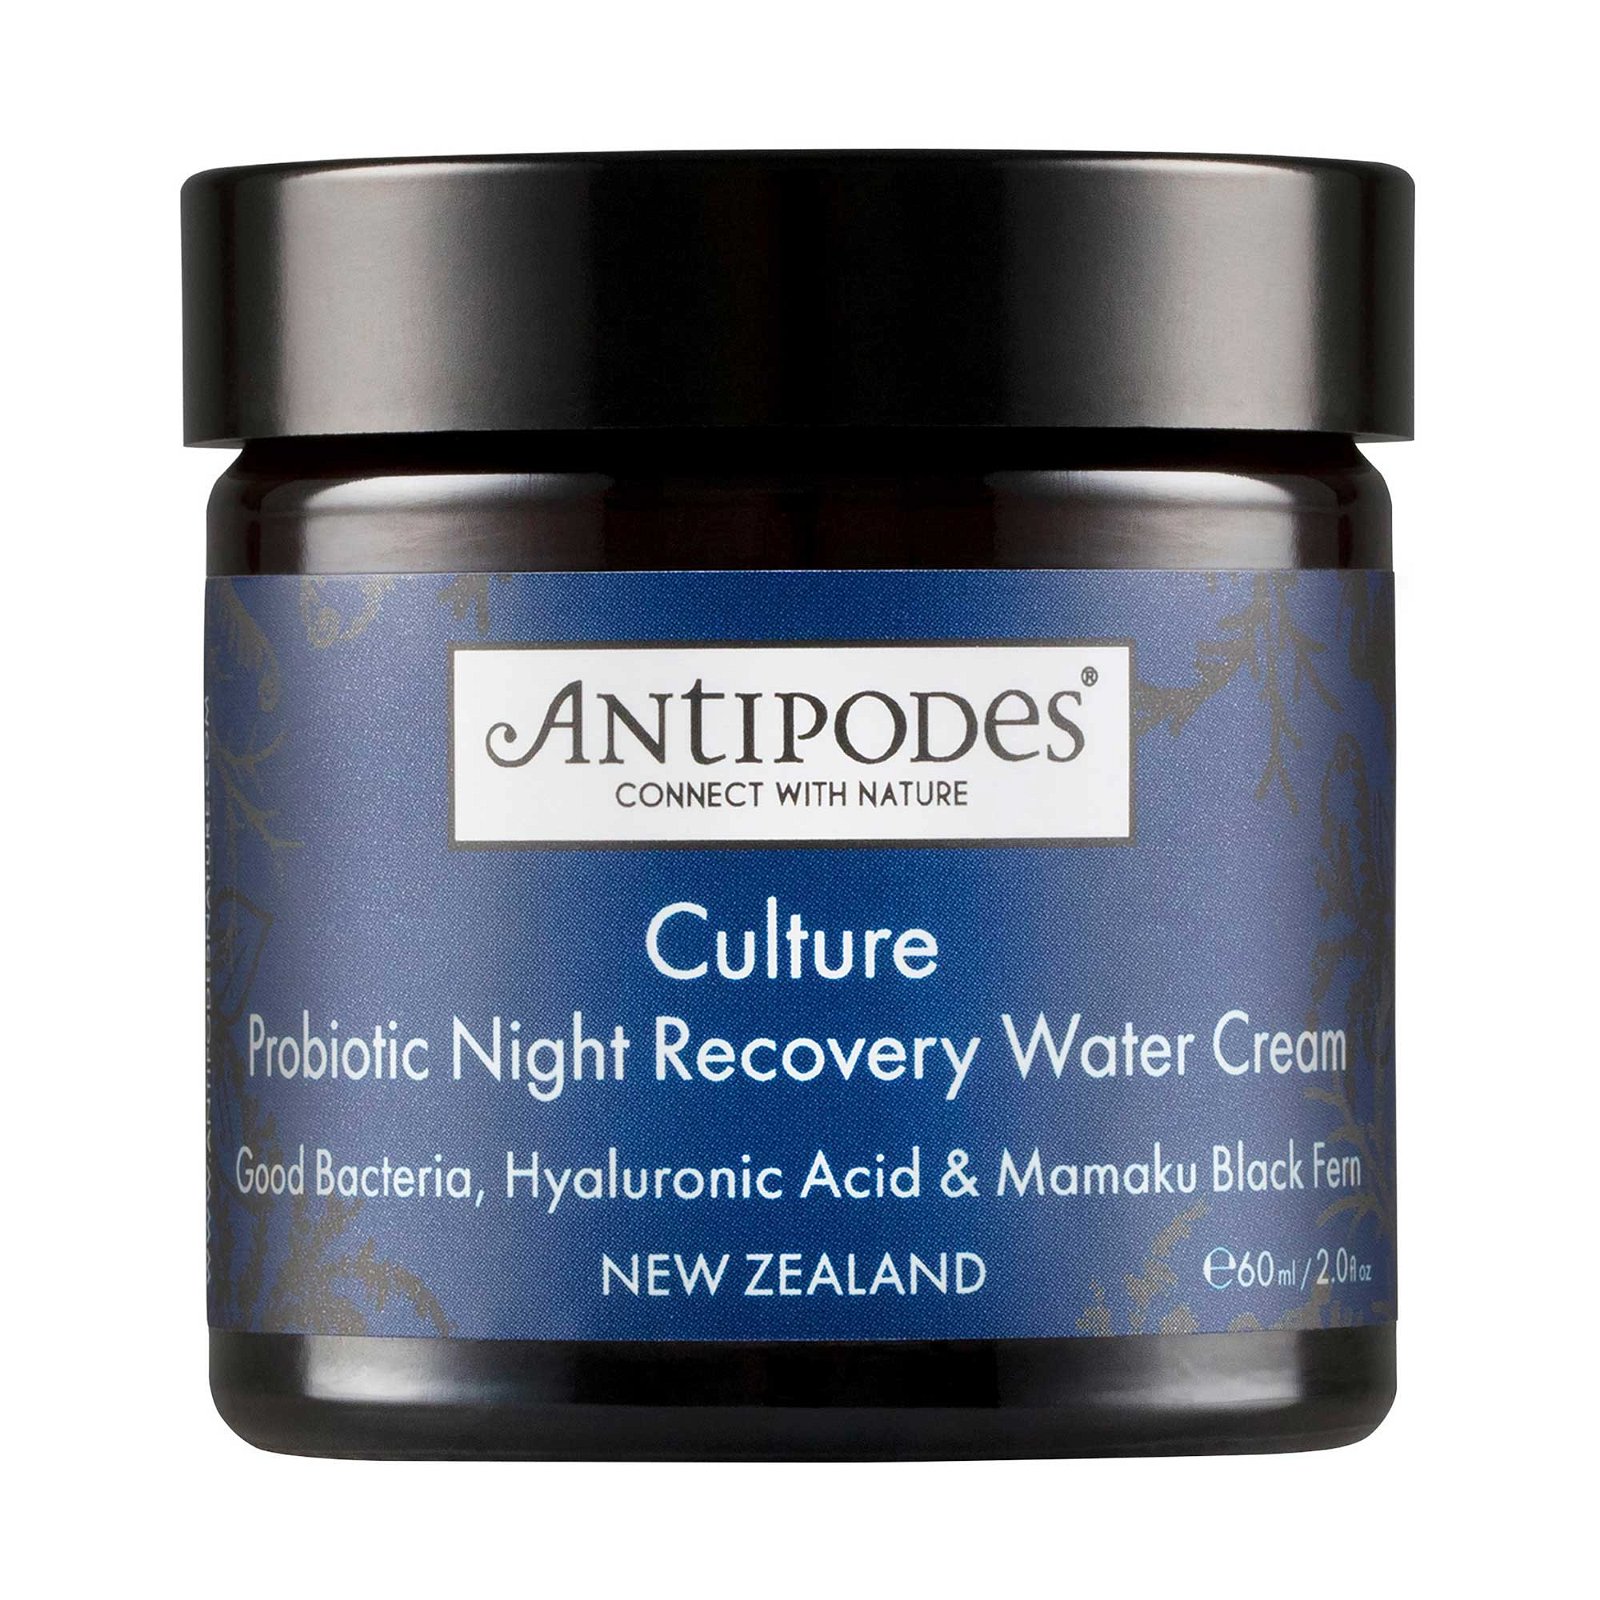 25% off Antipodes